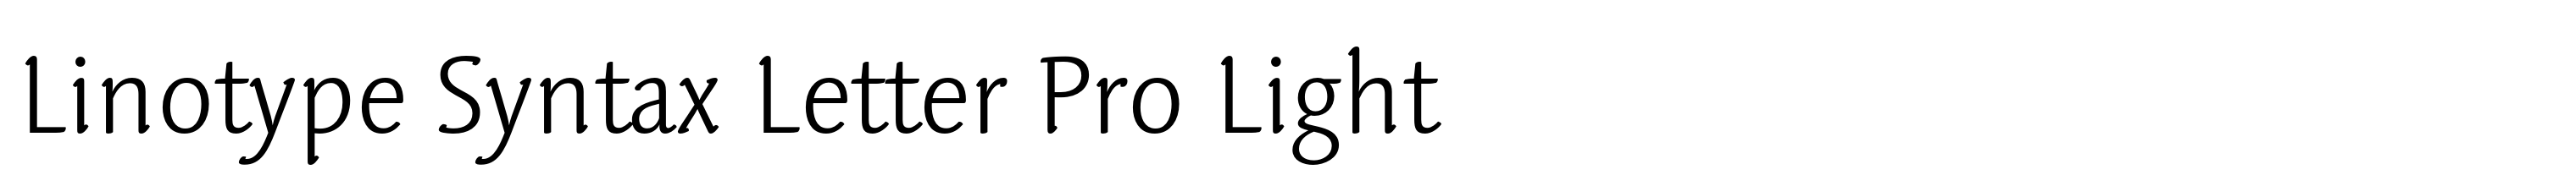 Linotype Syntax Letter Pro Light